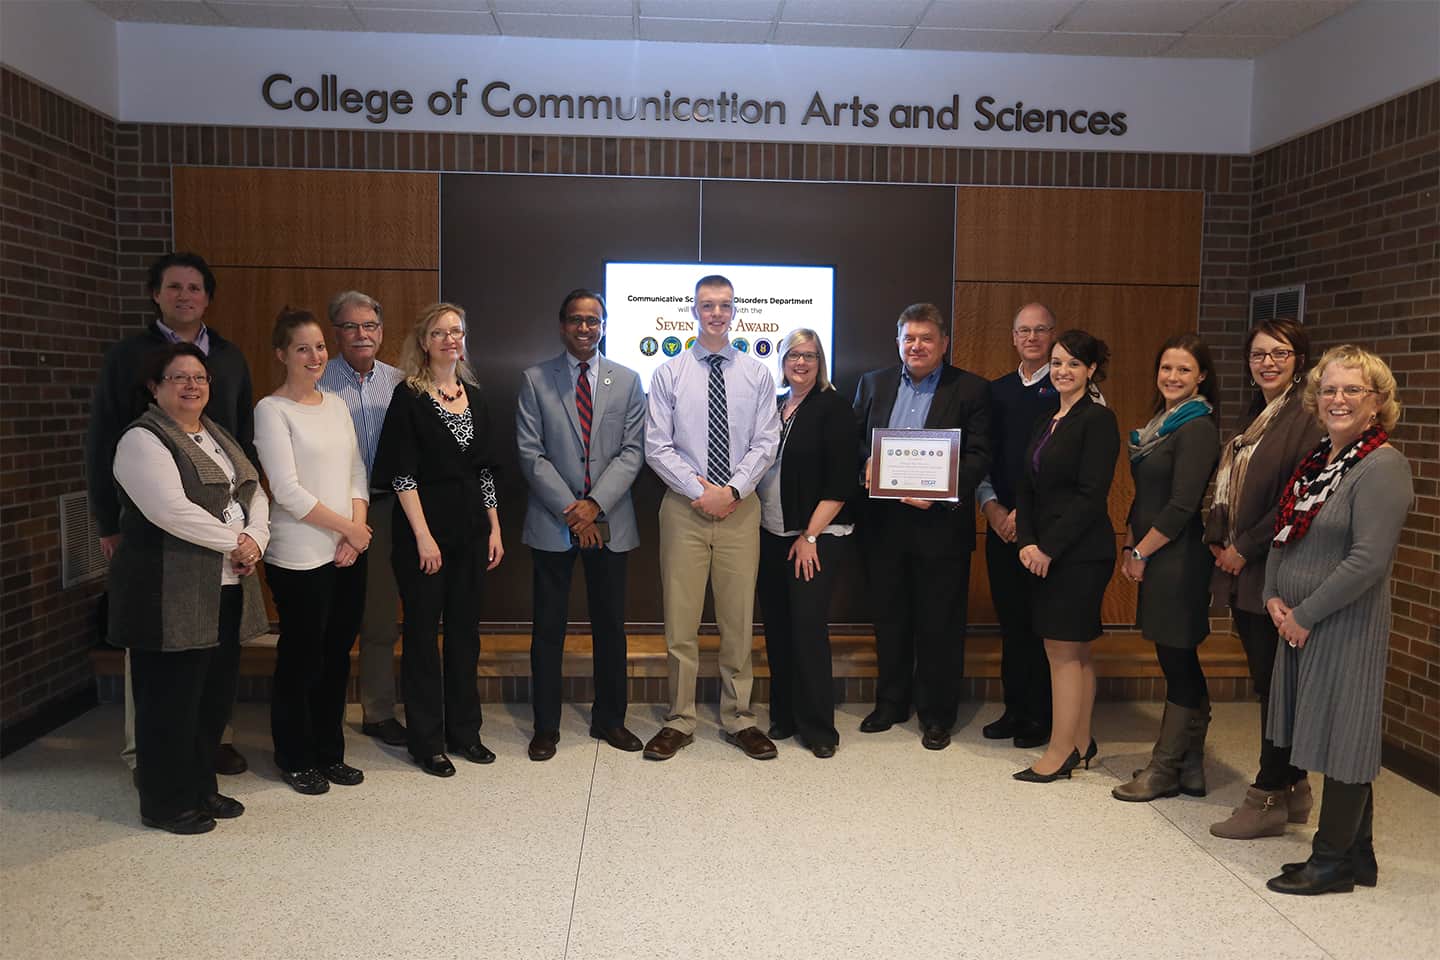 Blake Donovan with Communicative Sciences and Disorders department faculty and staff standing in lobby of the College of Communication Arts and Sciences building.